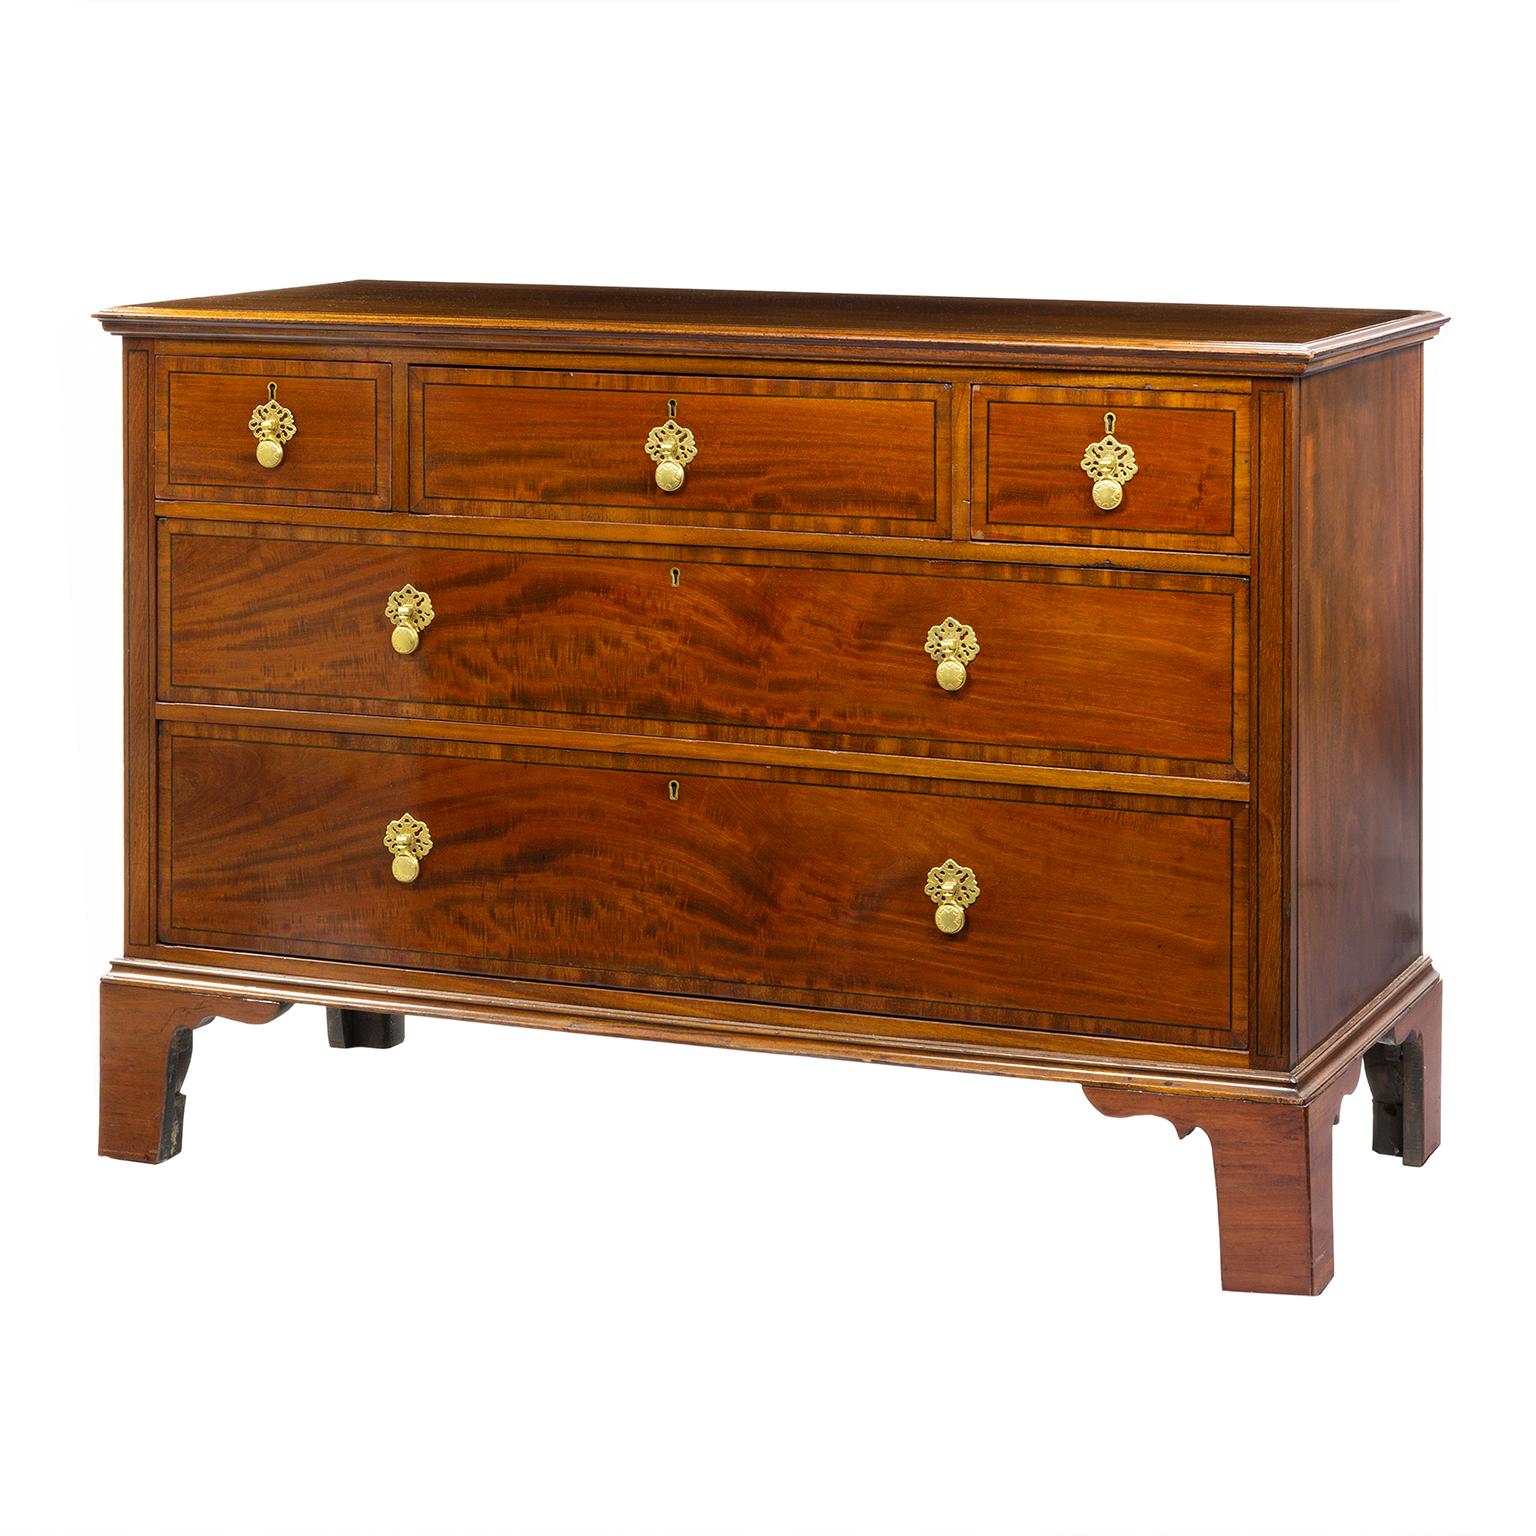 A fine mahogany, Edwardian chest of draws dating to the early part of the 20th century and made by Waring and Gillow. The whole cross-banded in satinwood edged in ebony a fine example of the outstanding quality produced by this prestigious company